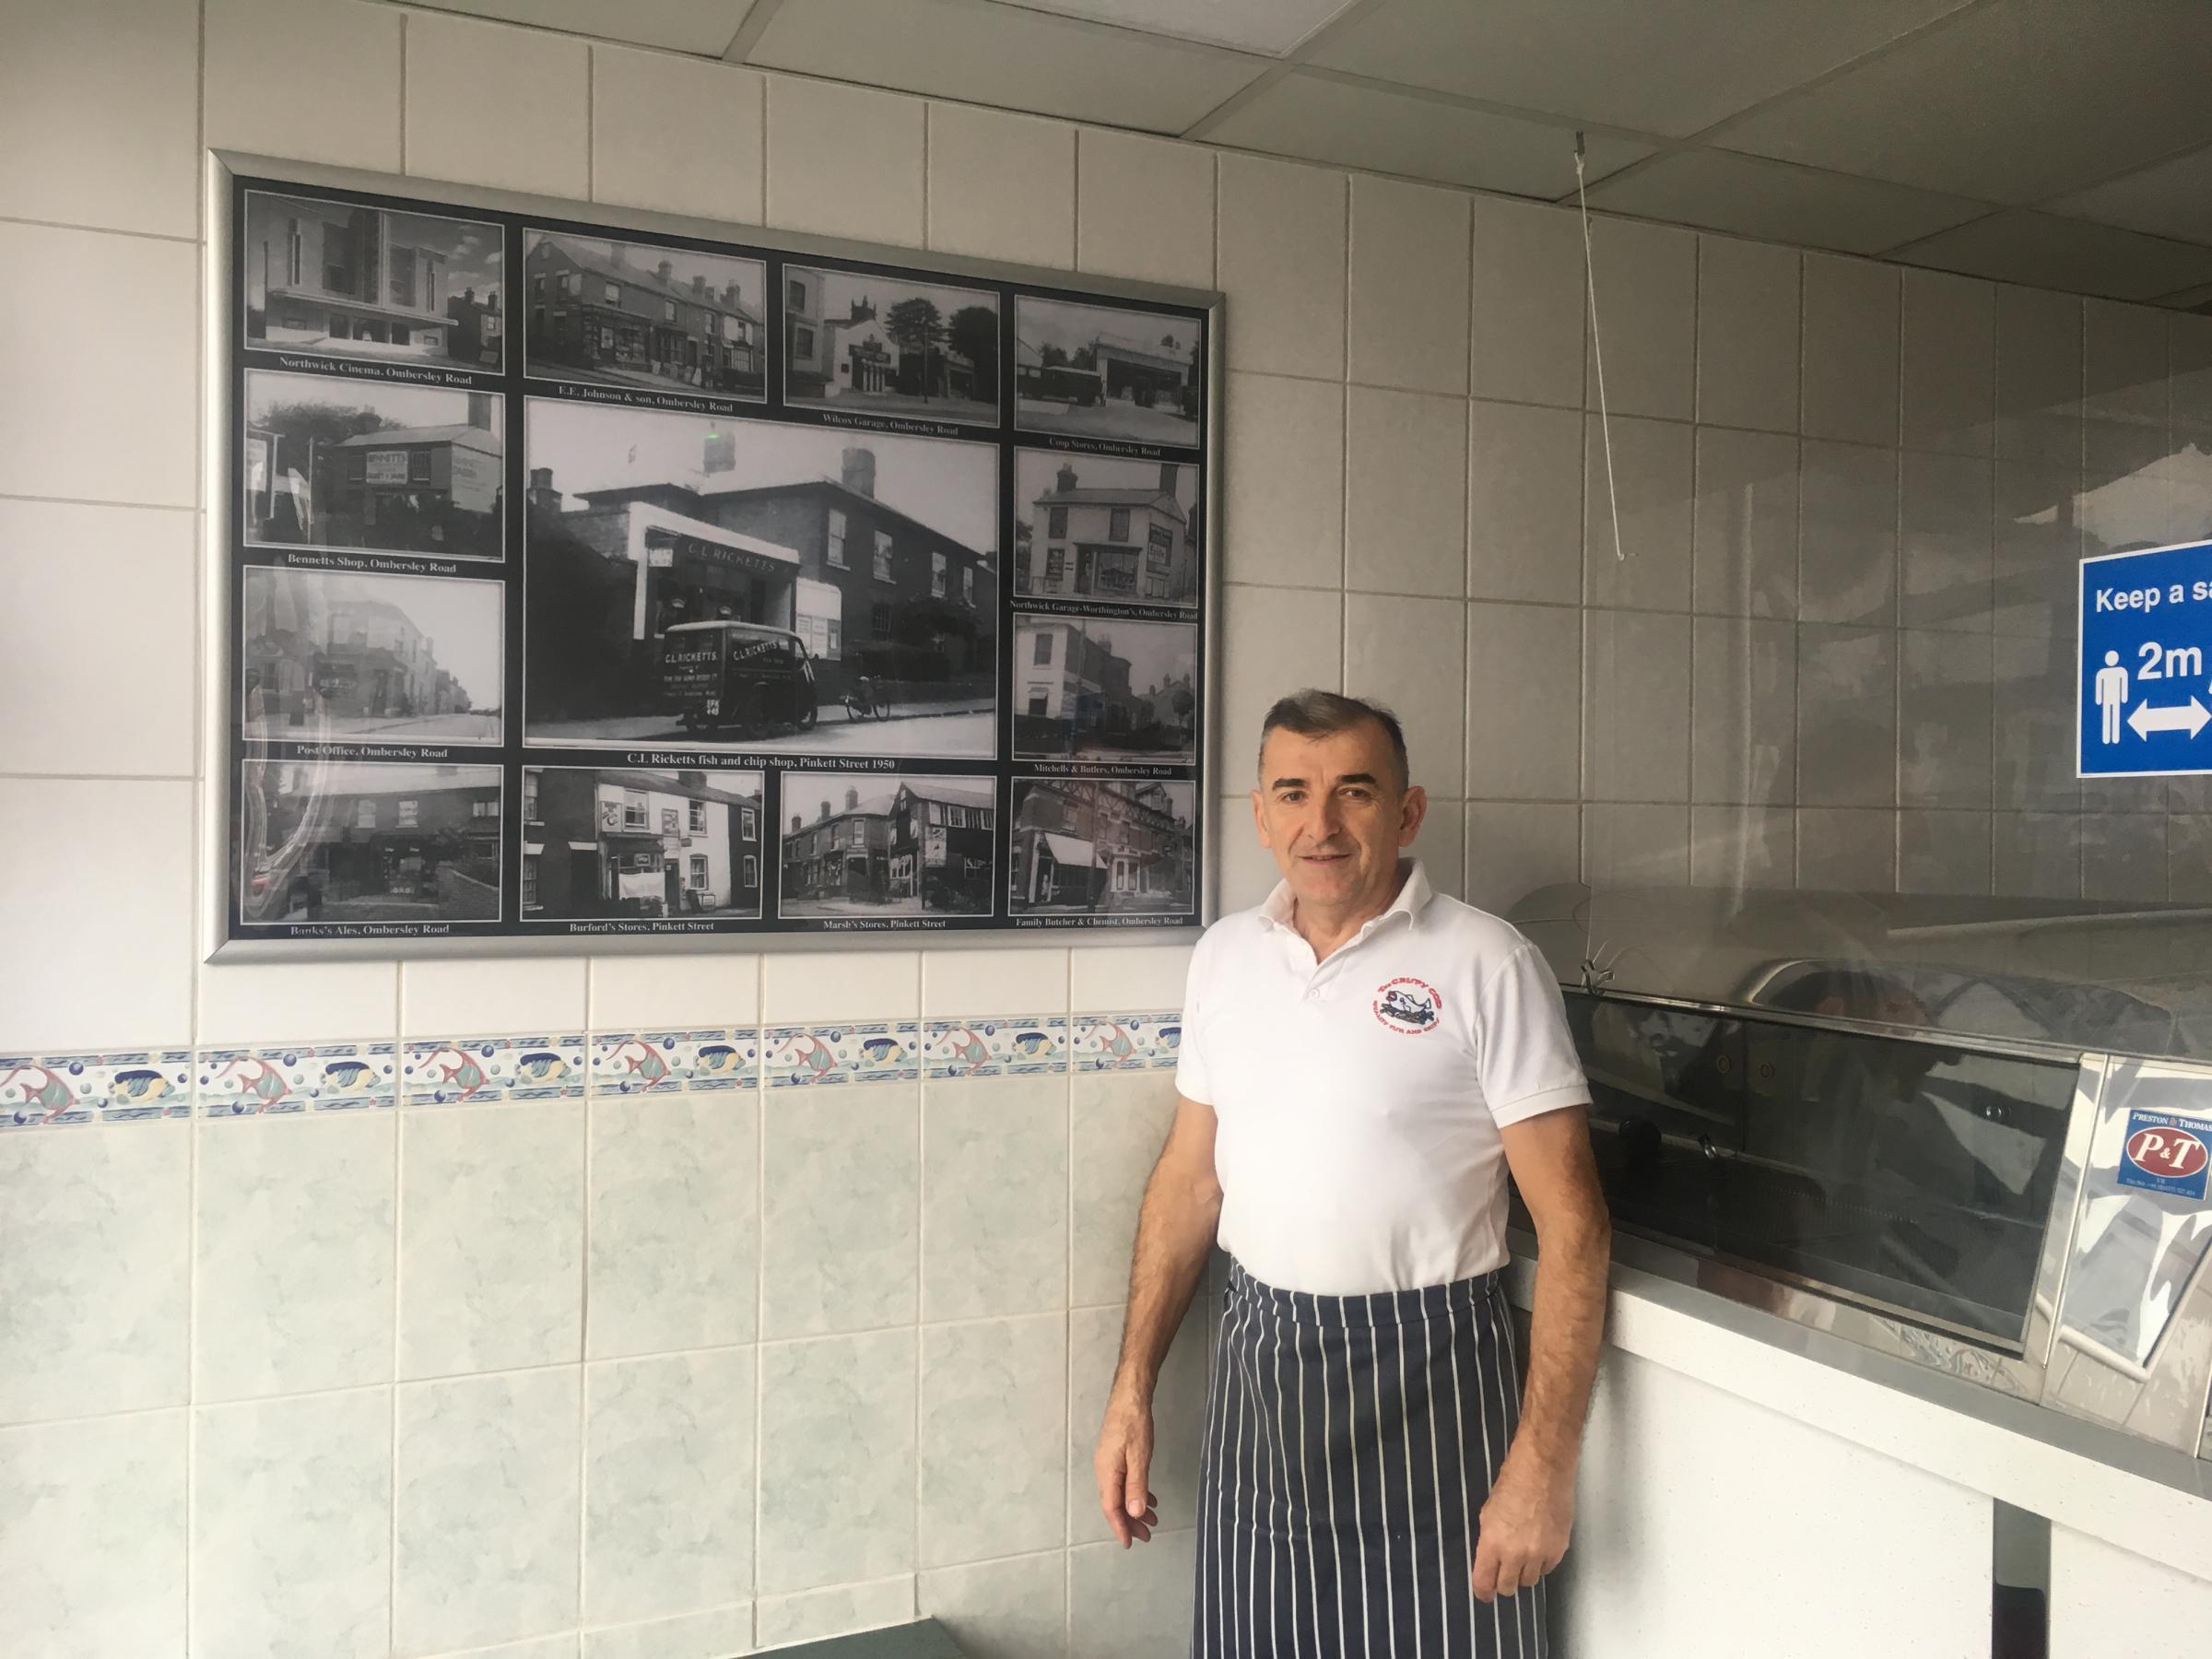 The Crispy Cod owner Predrag Djuric with a display inside his shop of old photos of local businesses